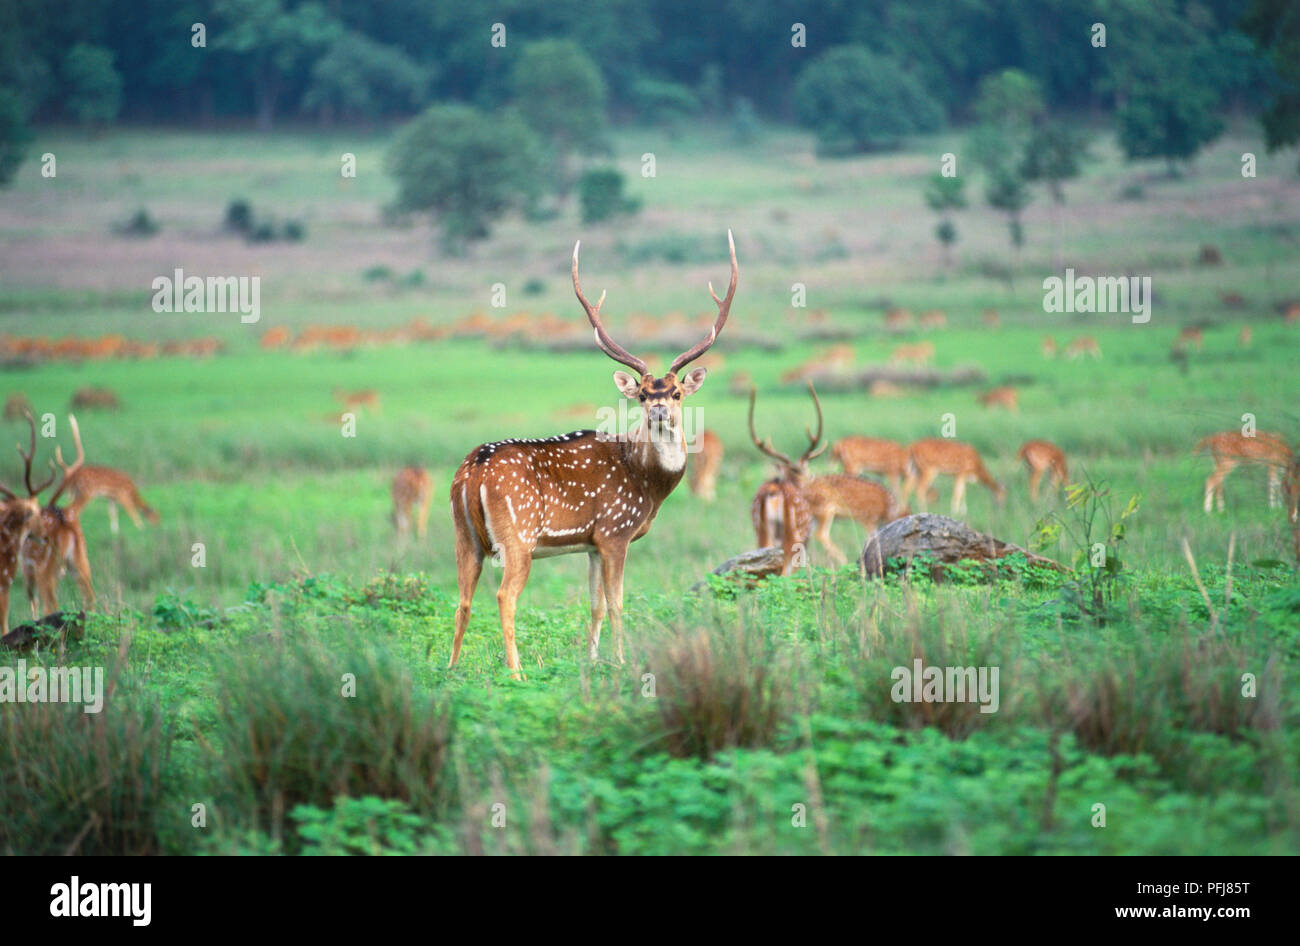 India, Kanha, herd of Axis Deer (Axis axis) grazing in meadow, stag looking at camera. Stock Photo